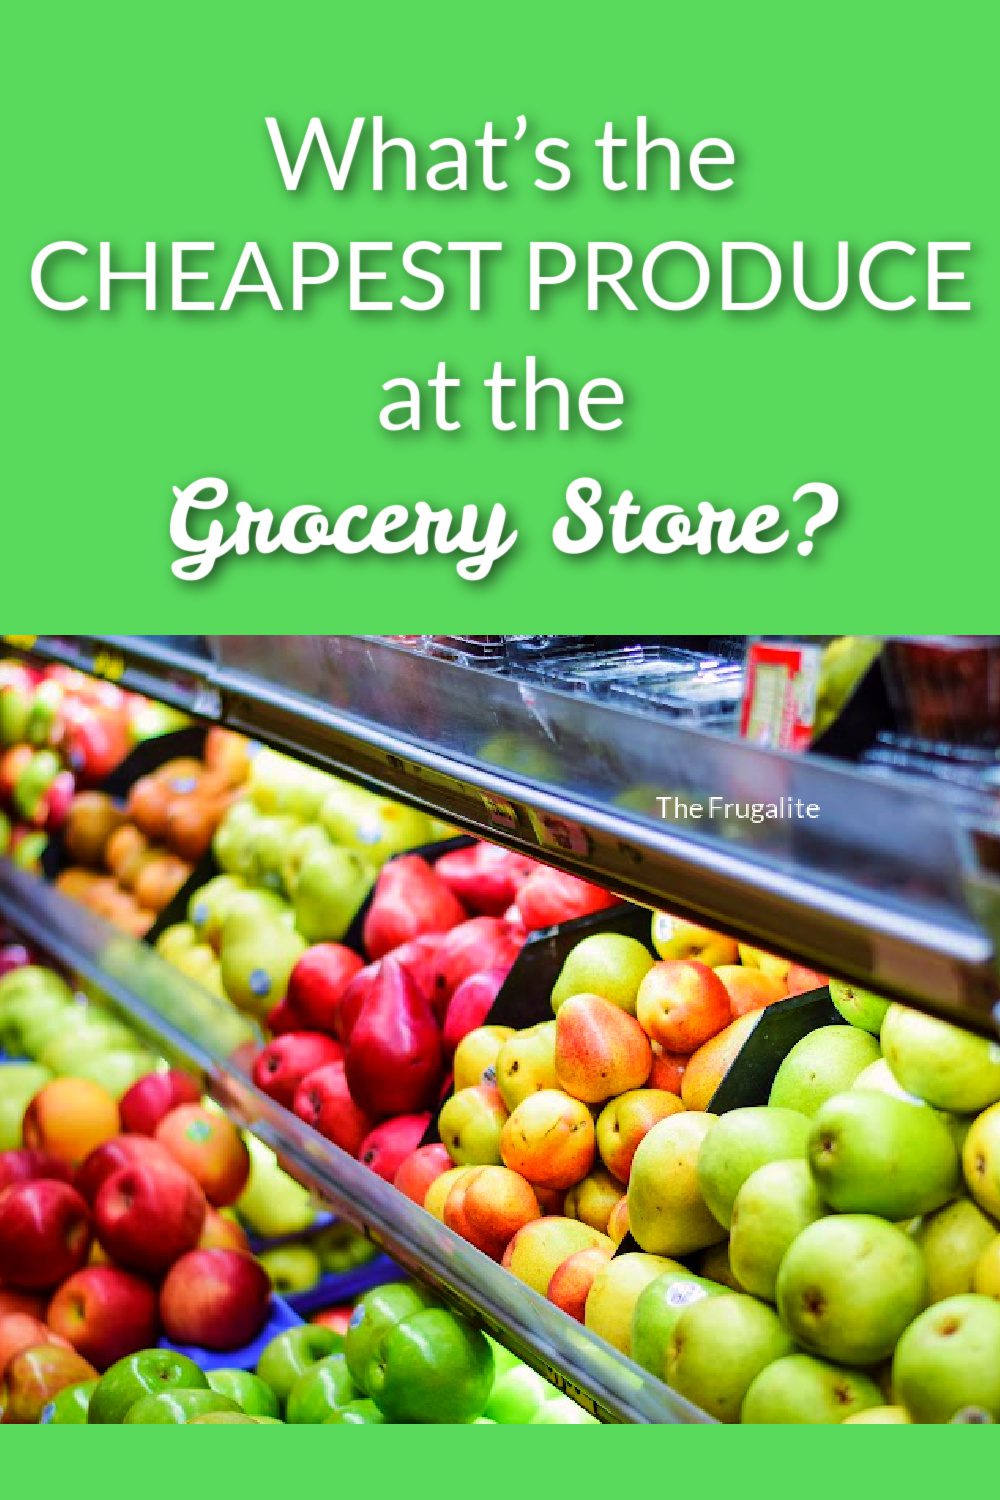 What’s the Cheapest Produce at the Grocery Store?